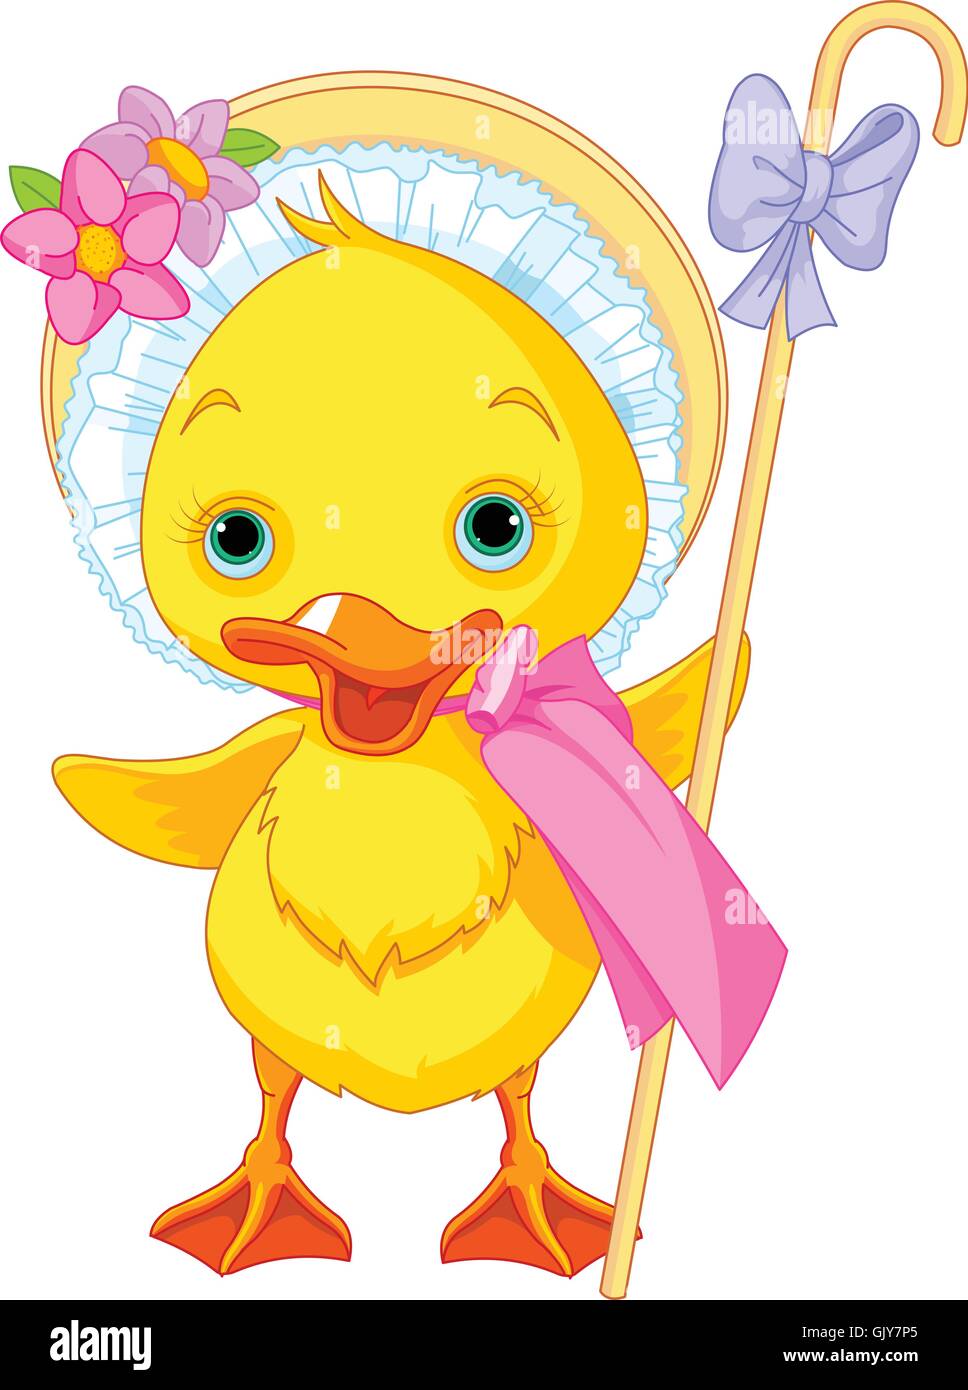 Easter Duckling with shepherdess staff Stock Vector